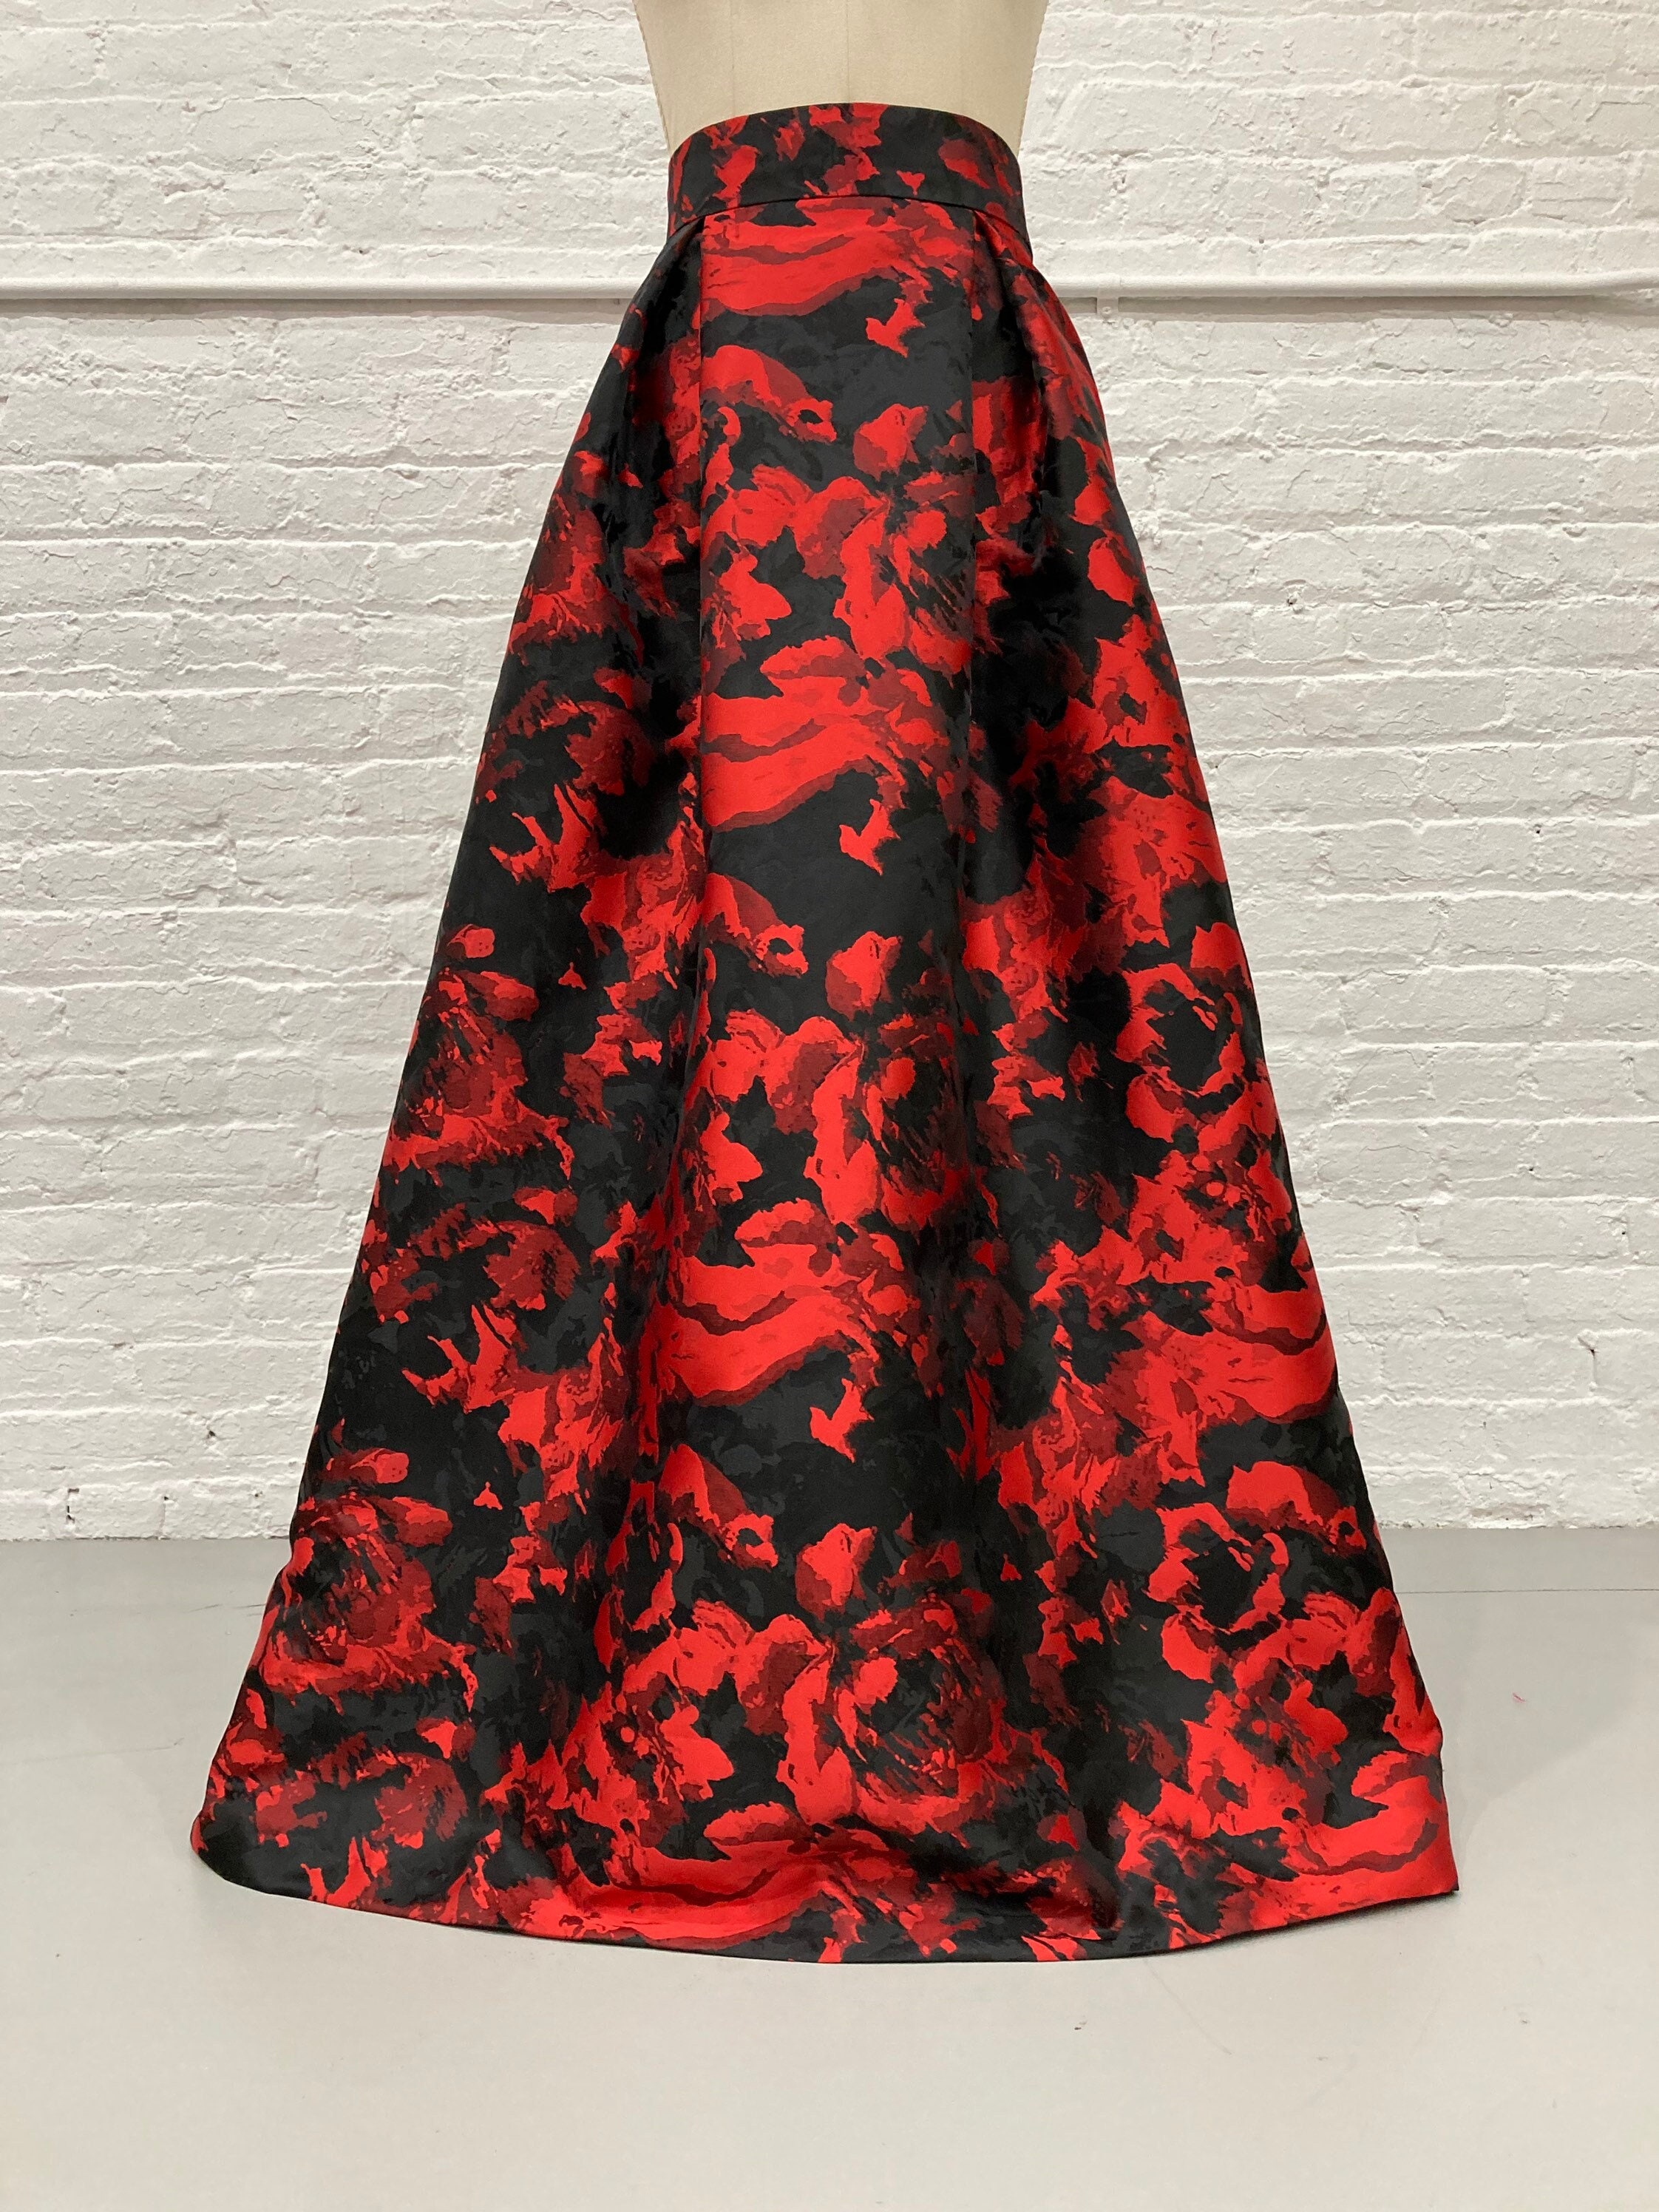 Black & Red Dress with Velvet Top, Red Sash and Black Floral Overlay Skirt,  Size S - Elements Unleashed